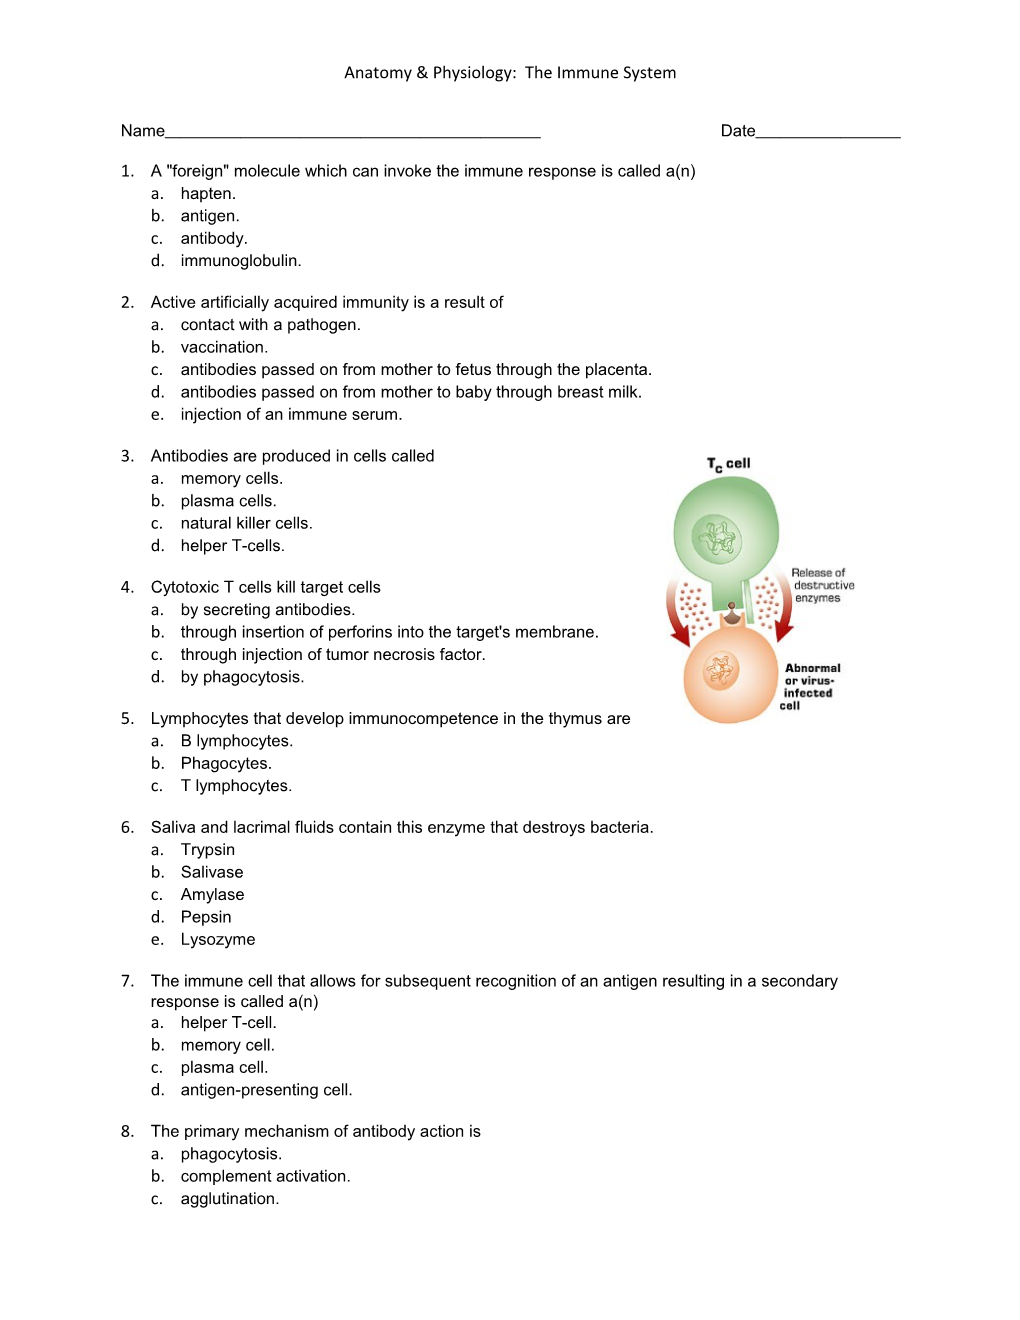 Anatomy & Physiology: the Immune System